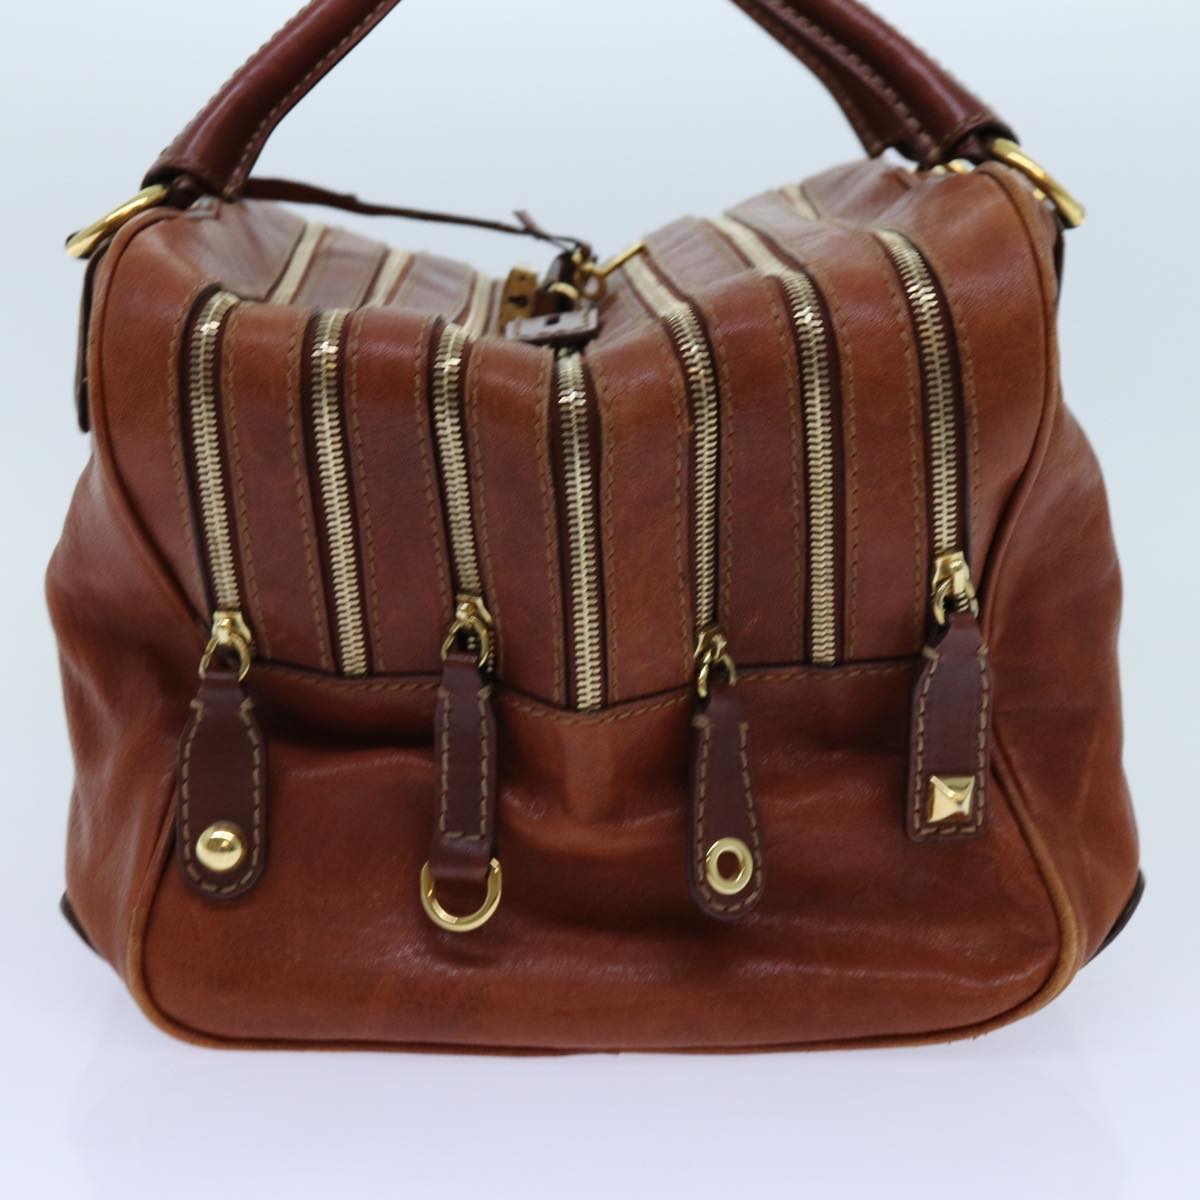 DOLCE&GABBANA Hand Bag Leather Brown Auth 70819